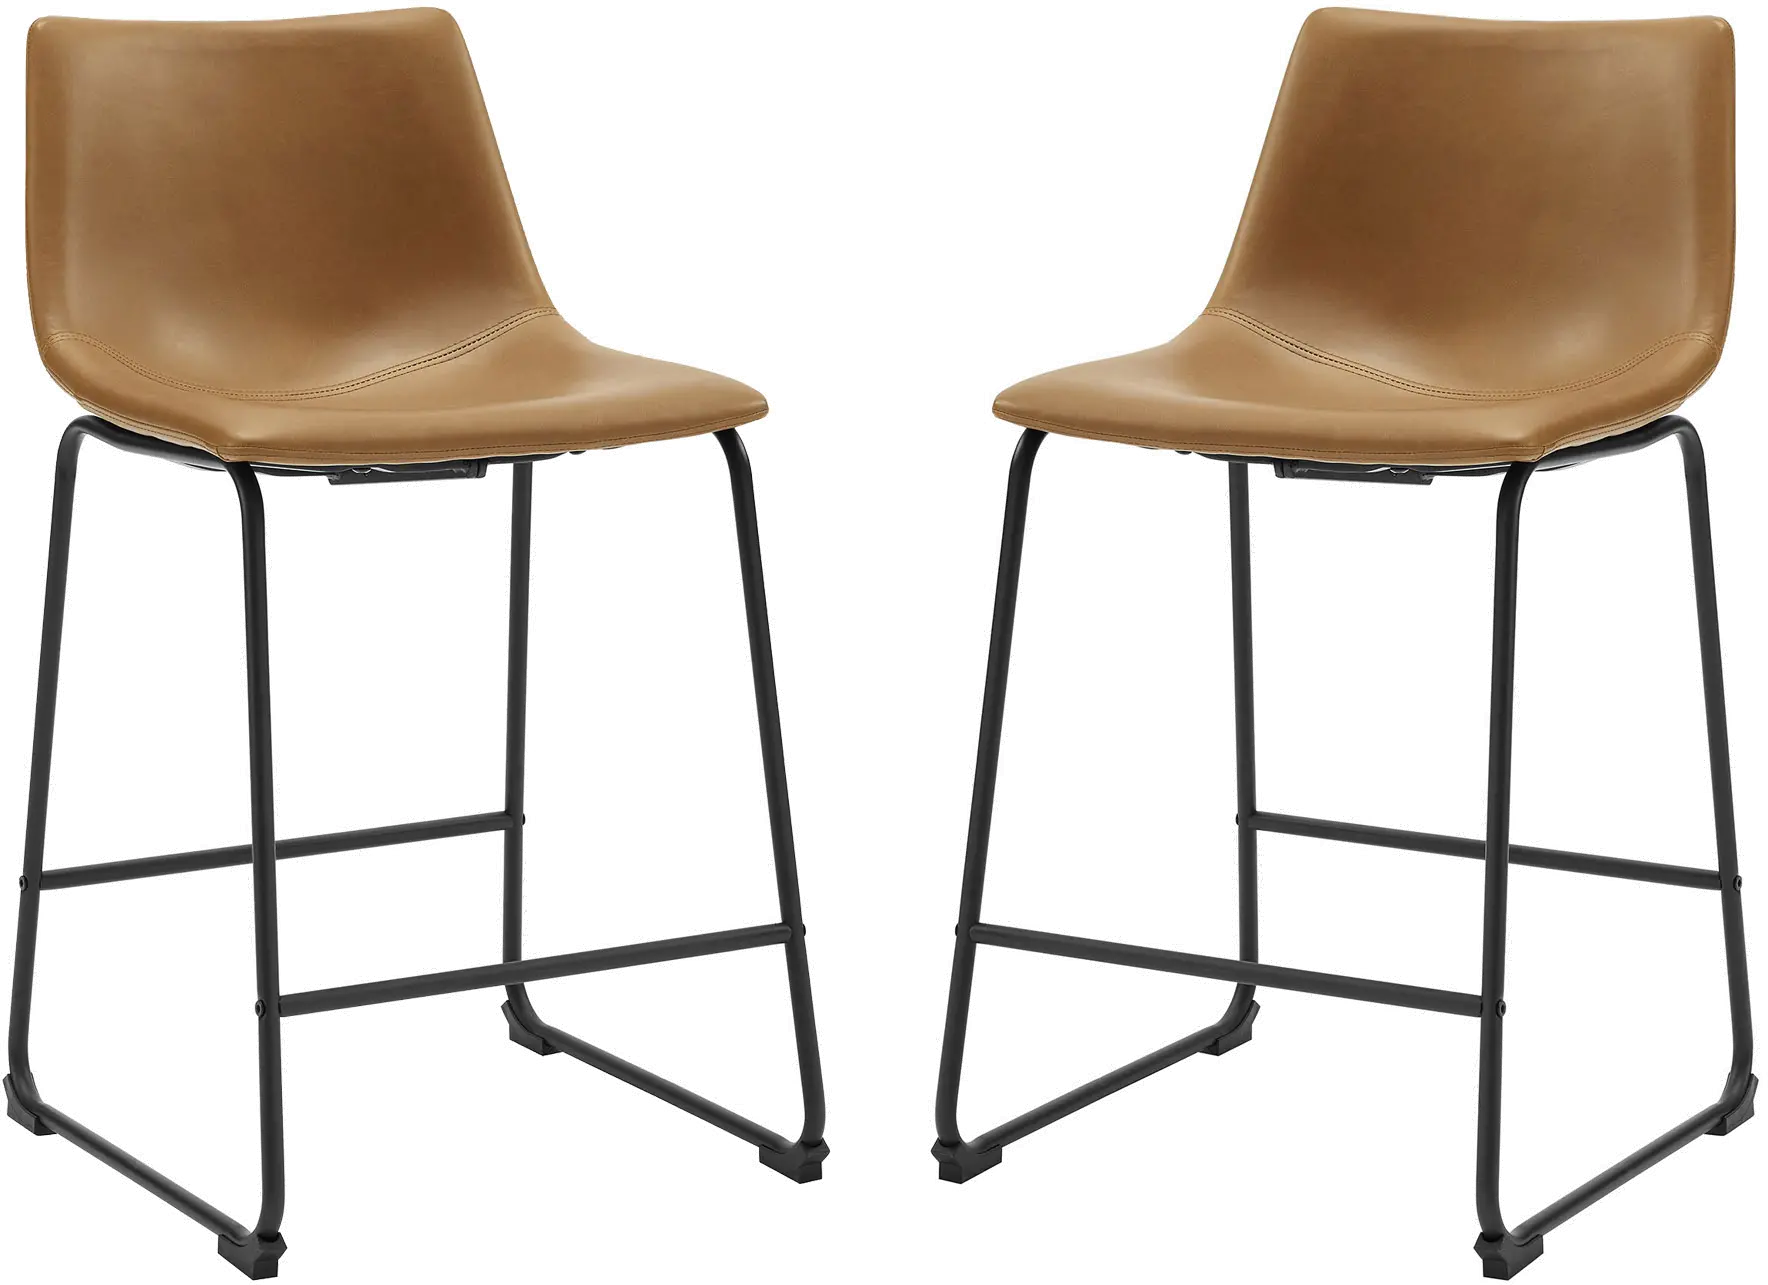 Slope Saddle Brown Counter Height Stool, Set of 2